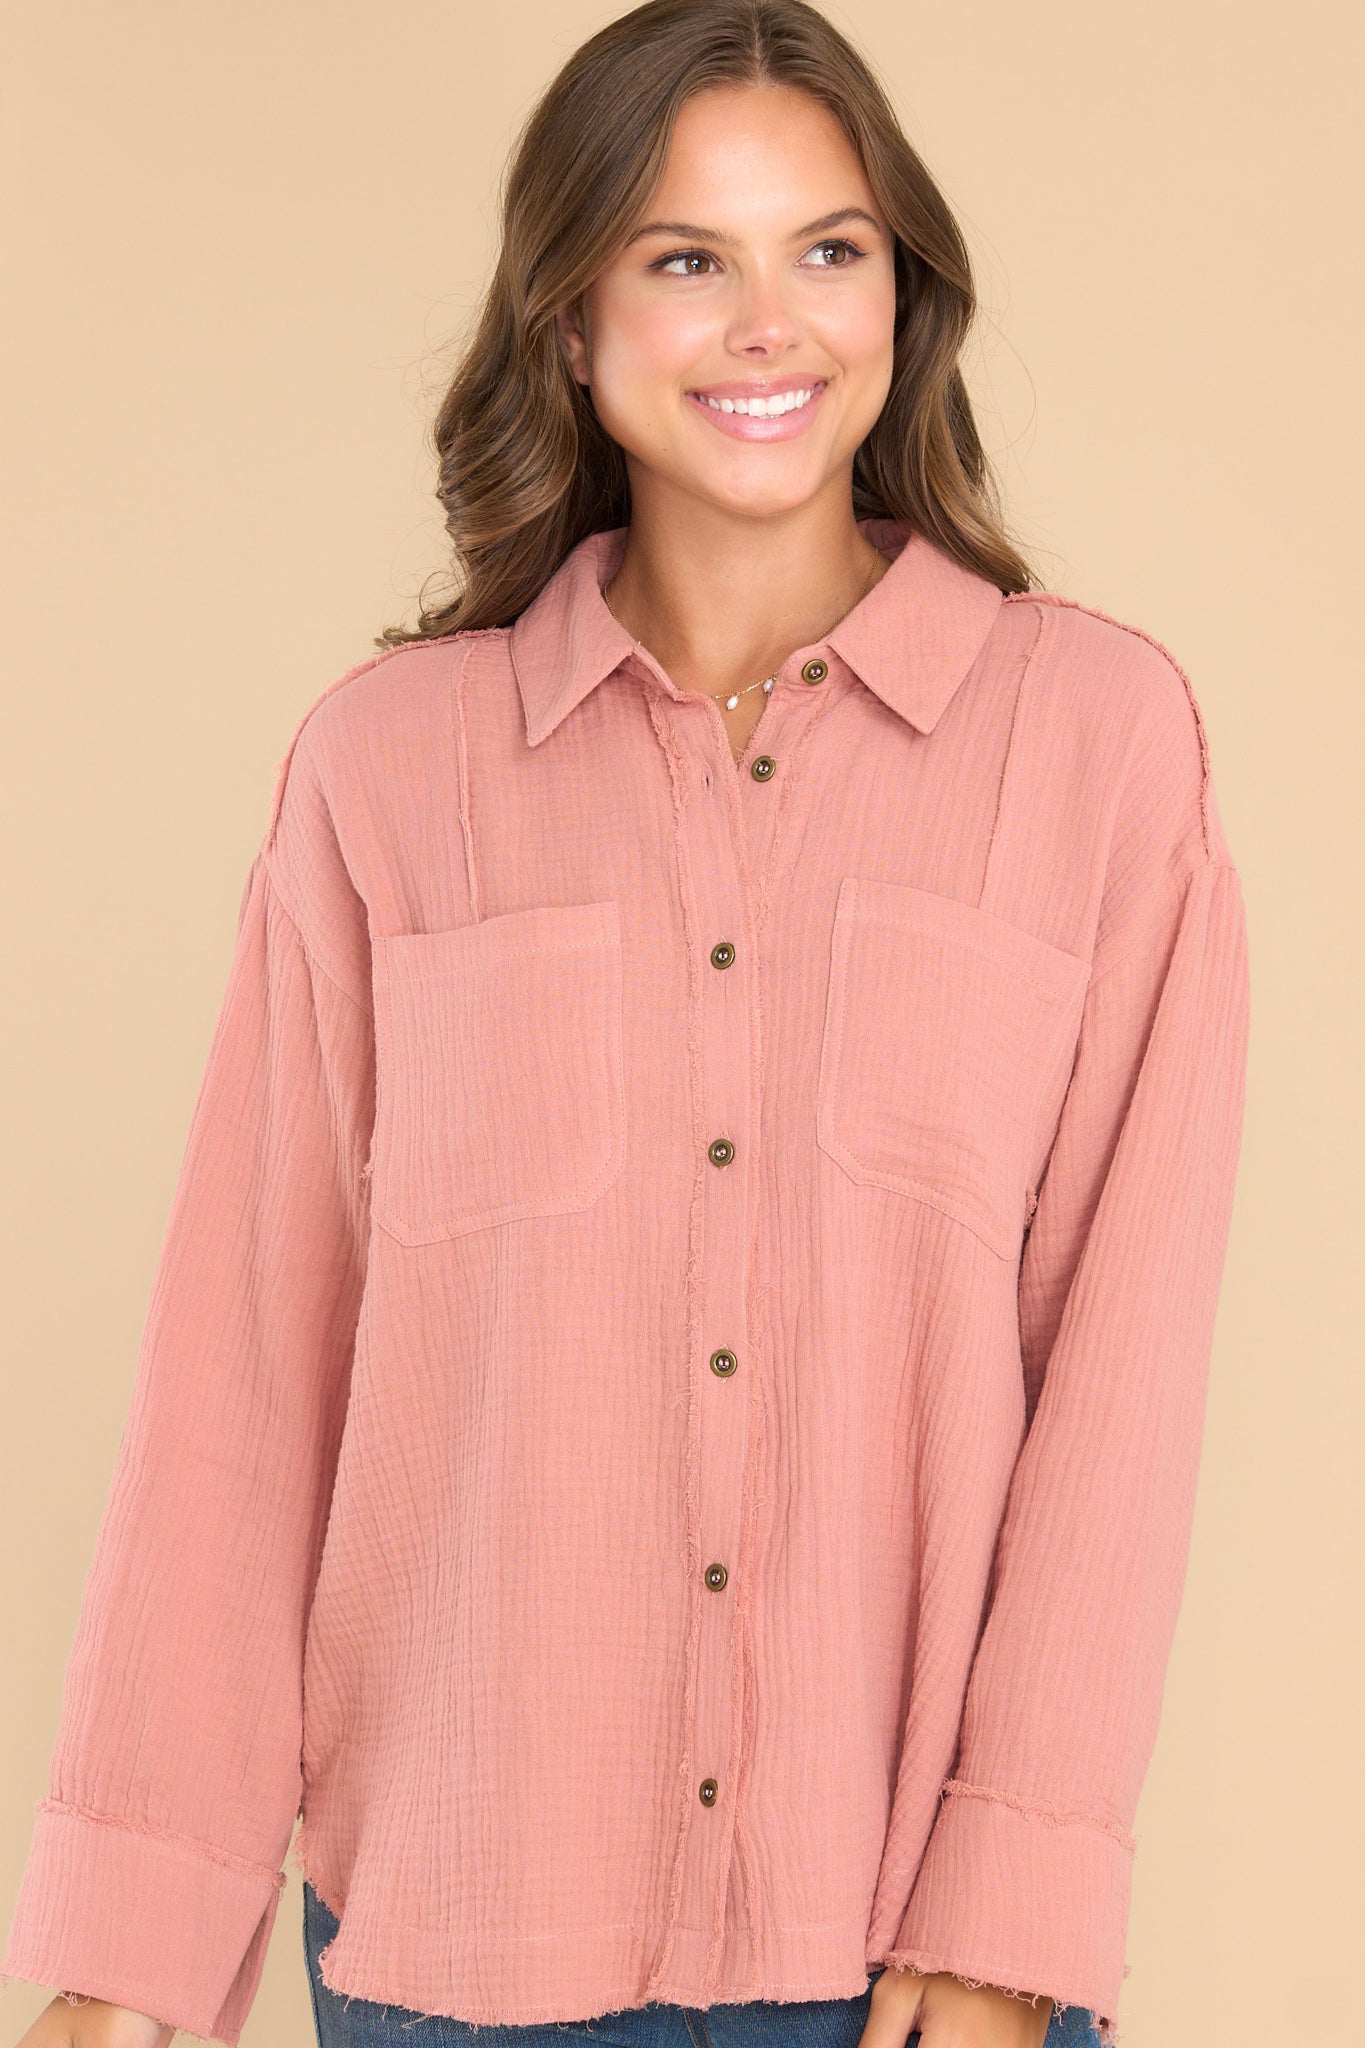 This blush pink top features a collared neckline, buttons down the front, and two pockets on the bust.